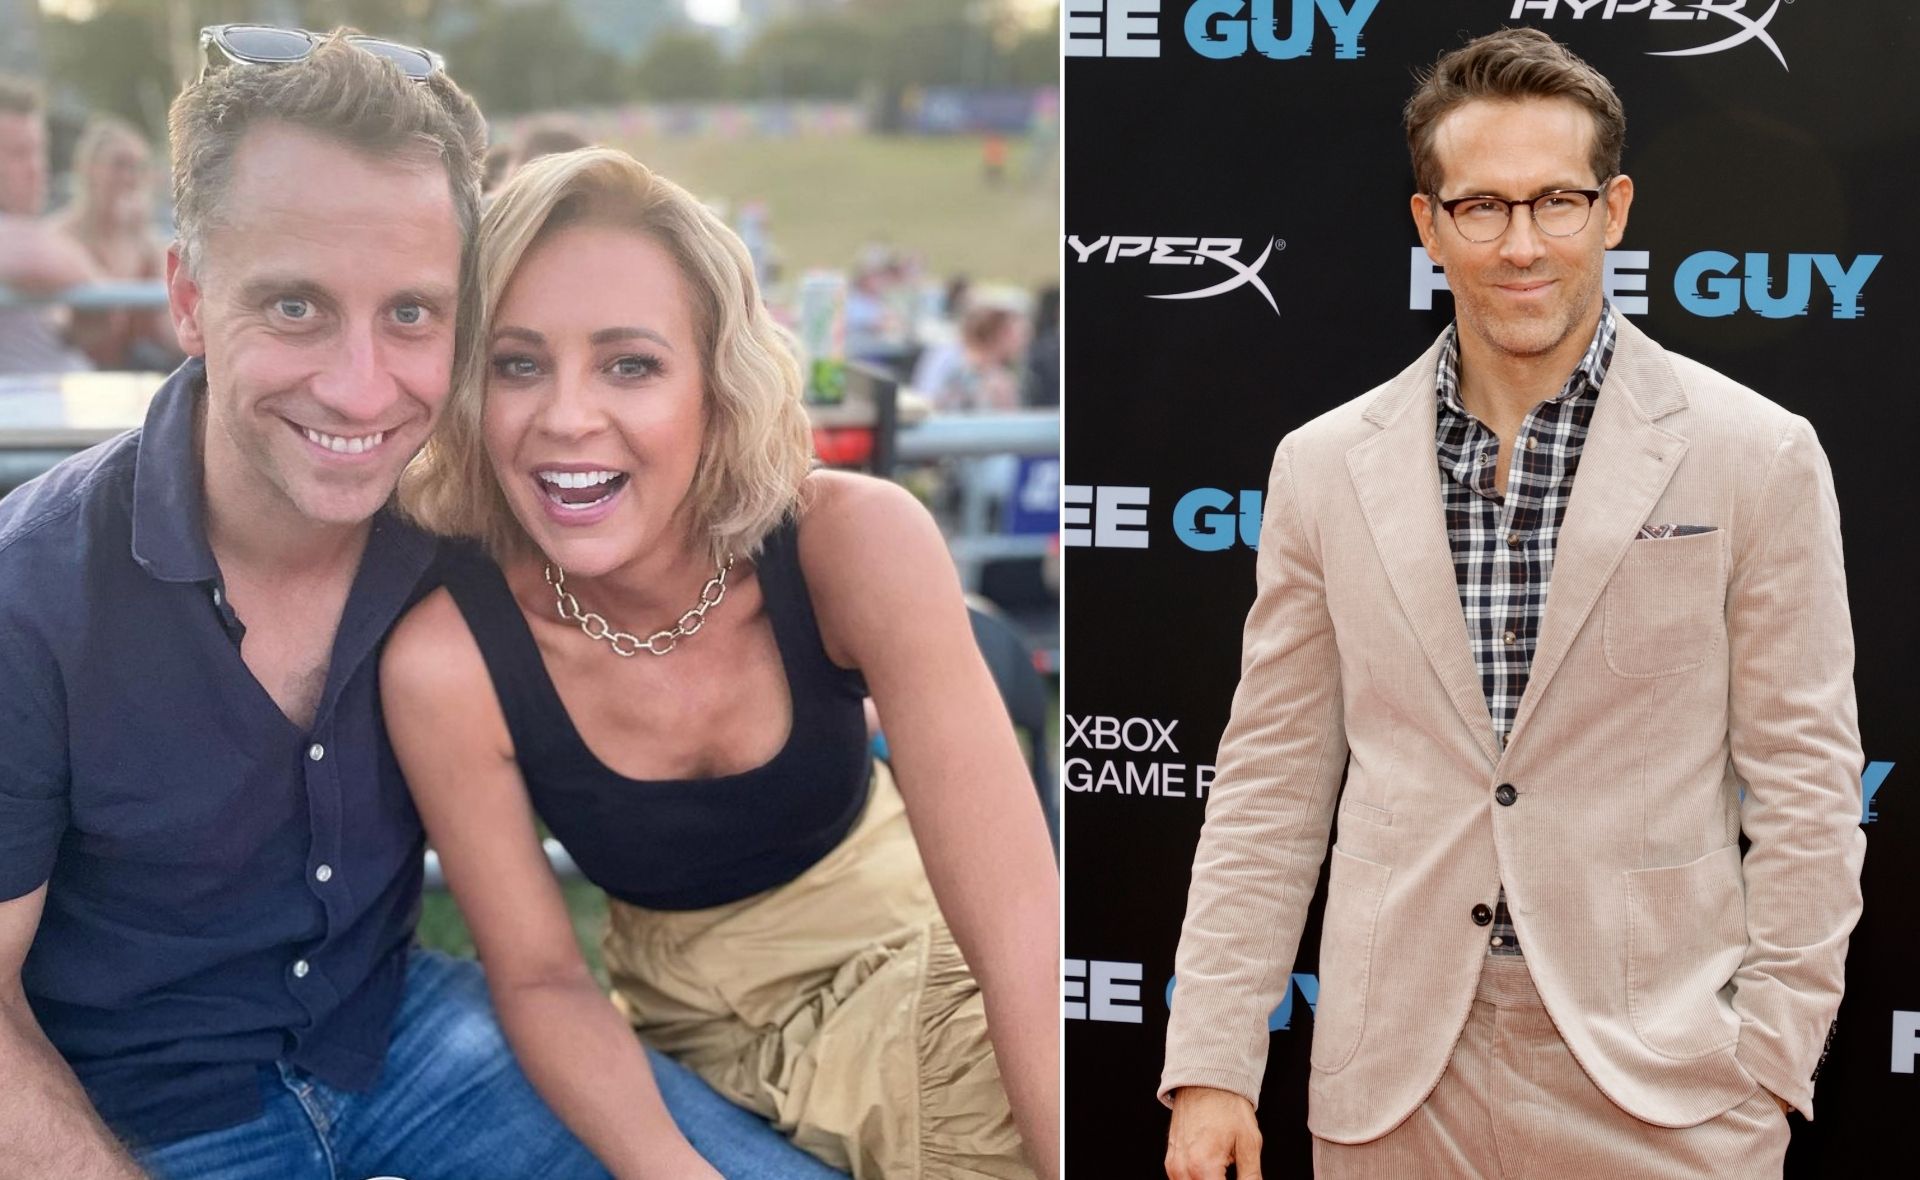 Carrie Bickmore enlists the help of Ryan Reynolds for a hilarious surprise video dedicated to her partner Chris Walker